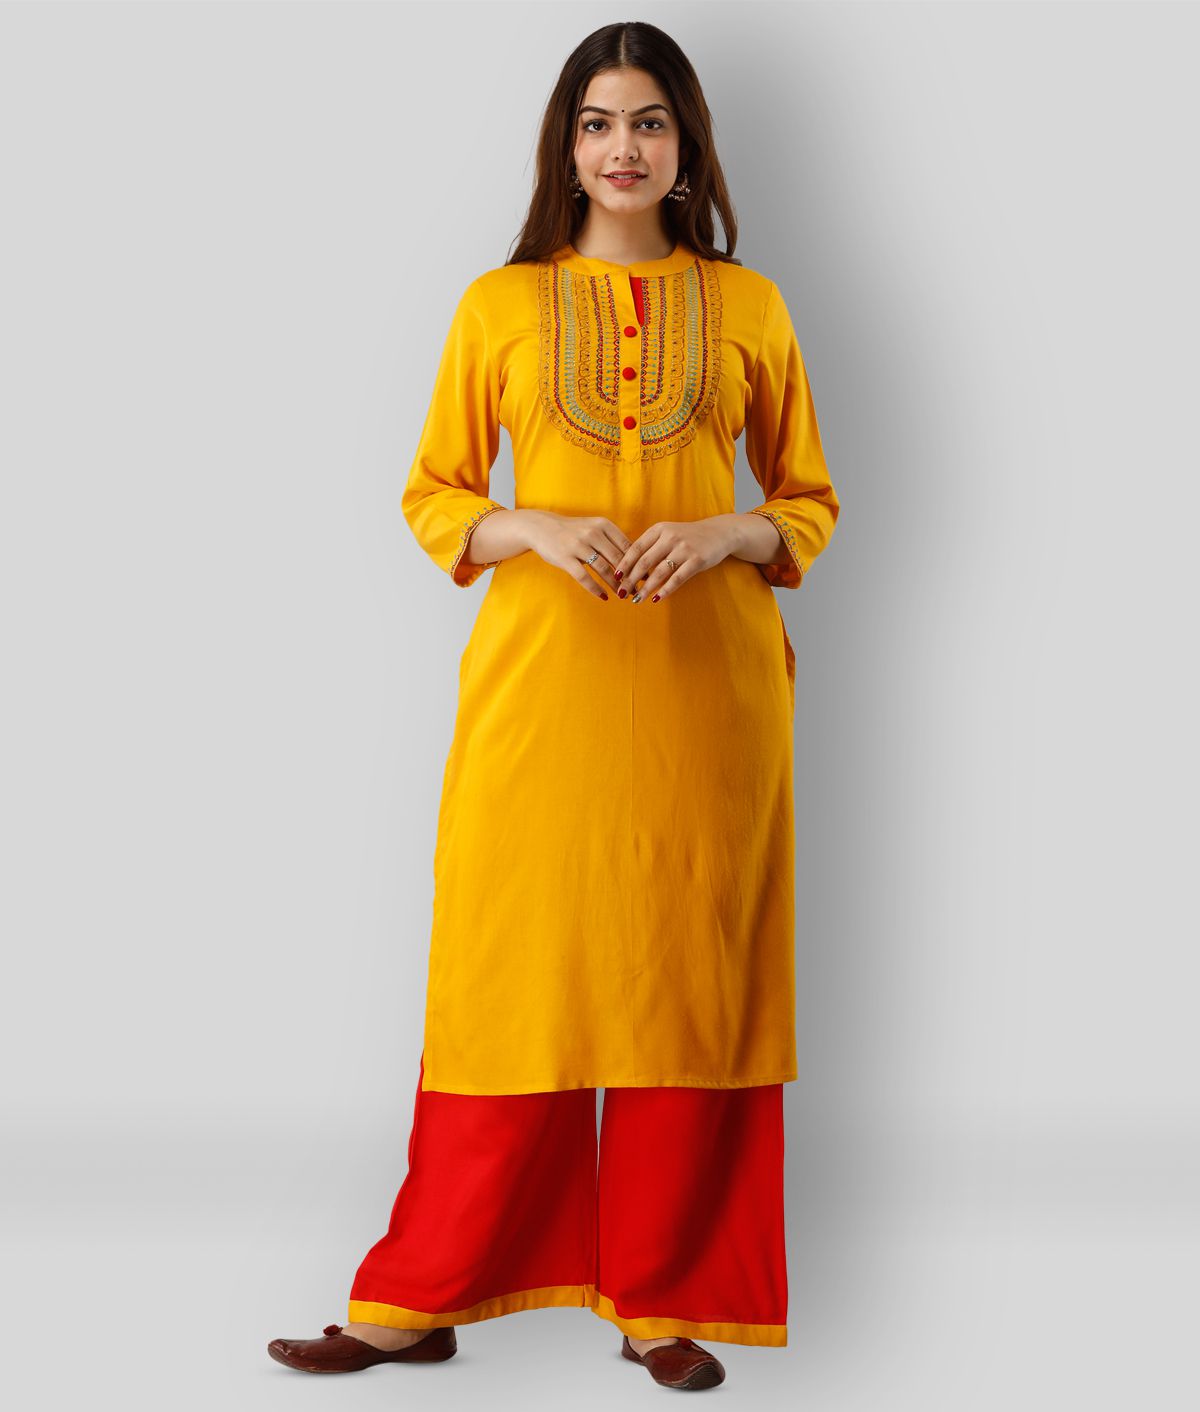     			Frionkandy - Yellow Straight Rayon Women's Stitched Salwar Suit ( Pack of 1 )